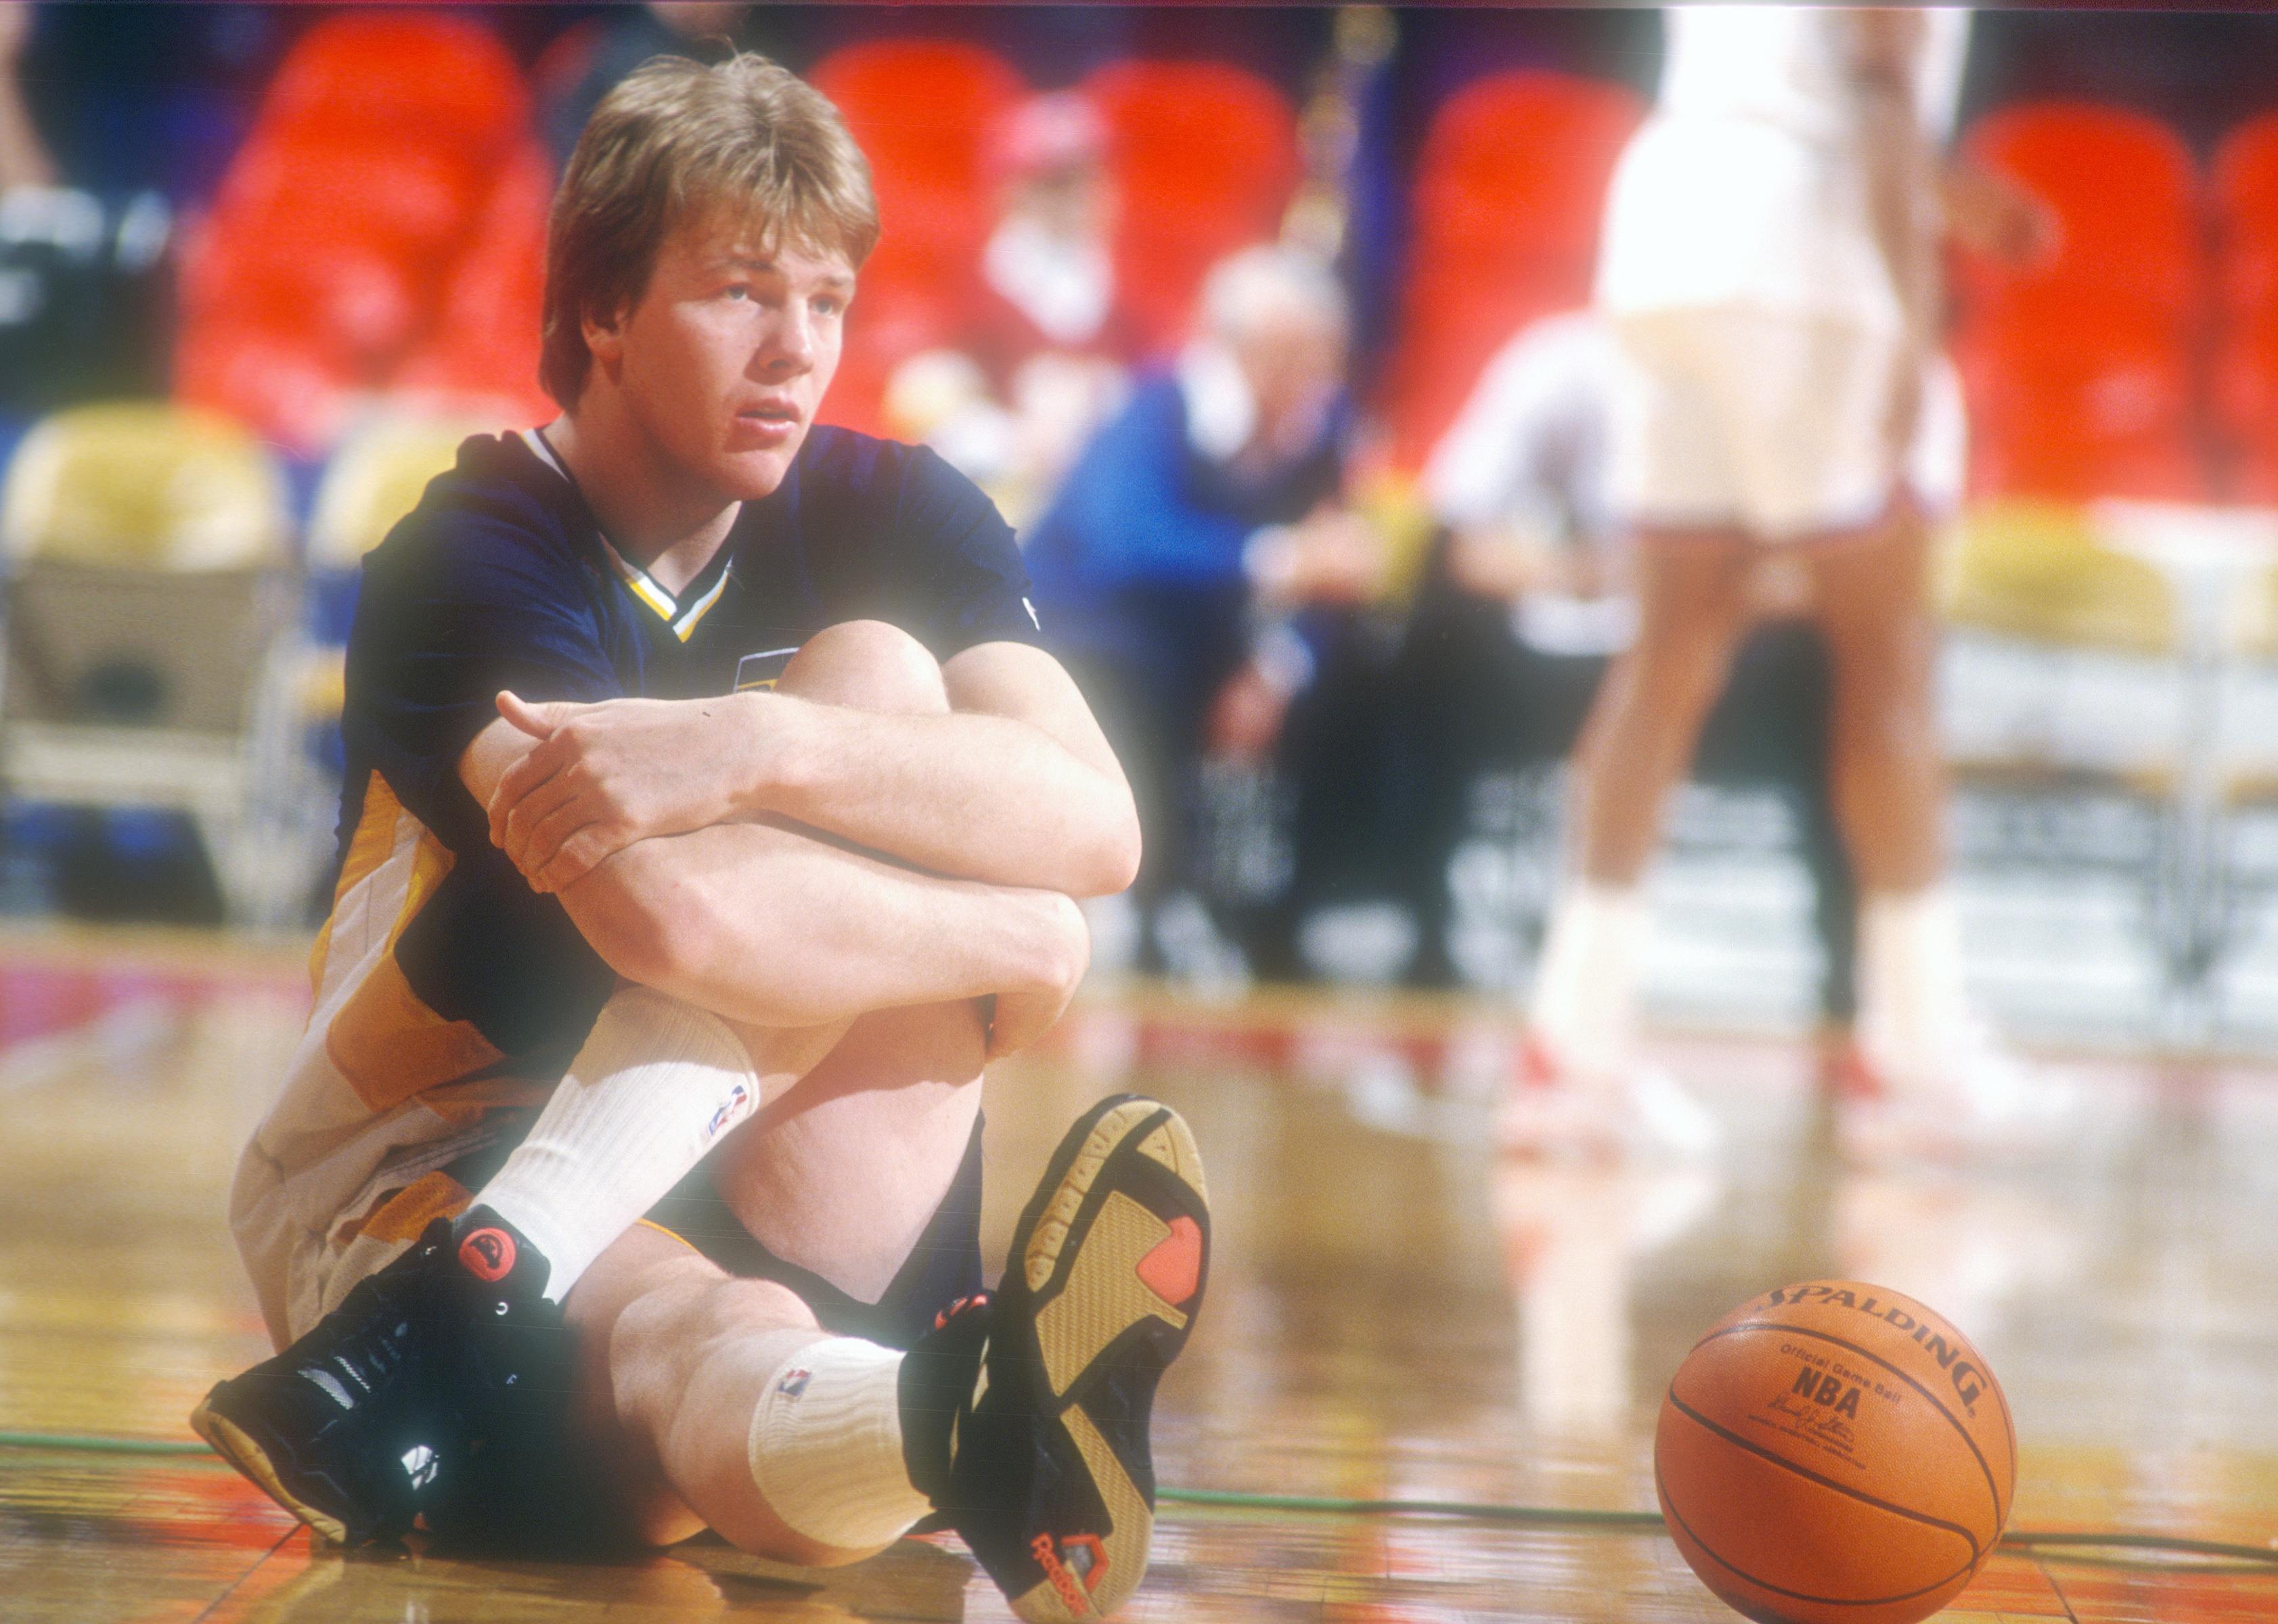 Rik Smits warming up before a game at Capital Centre.